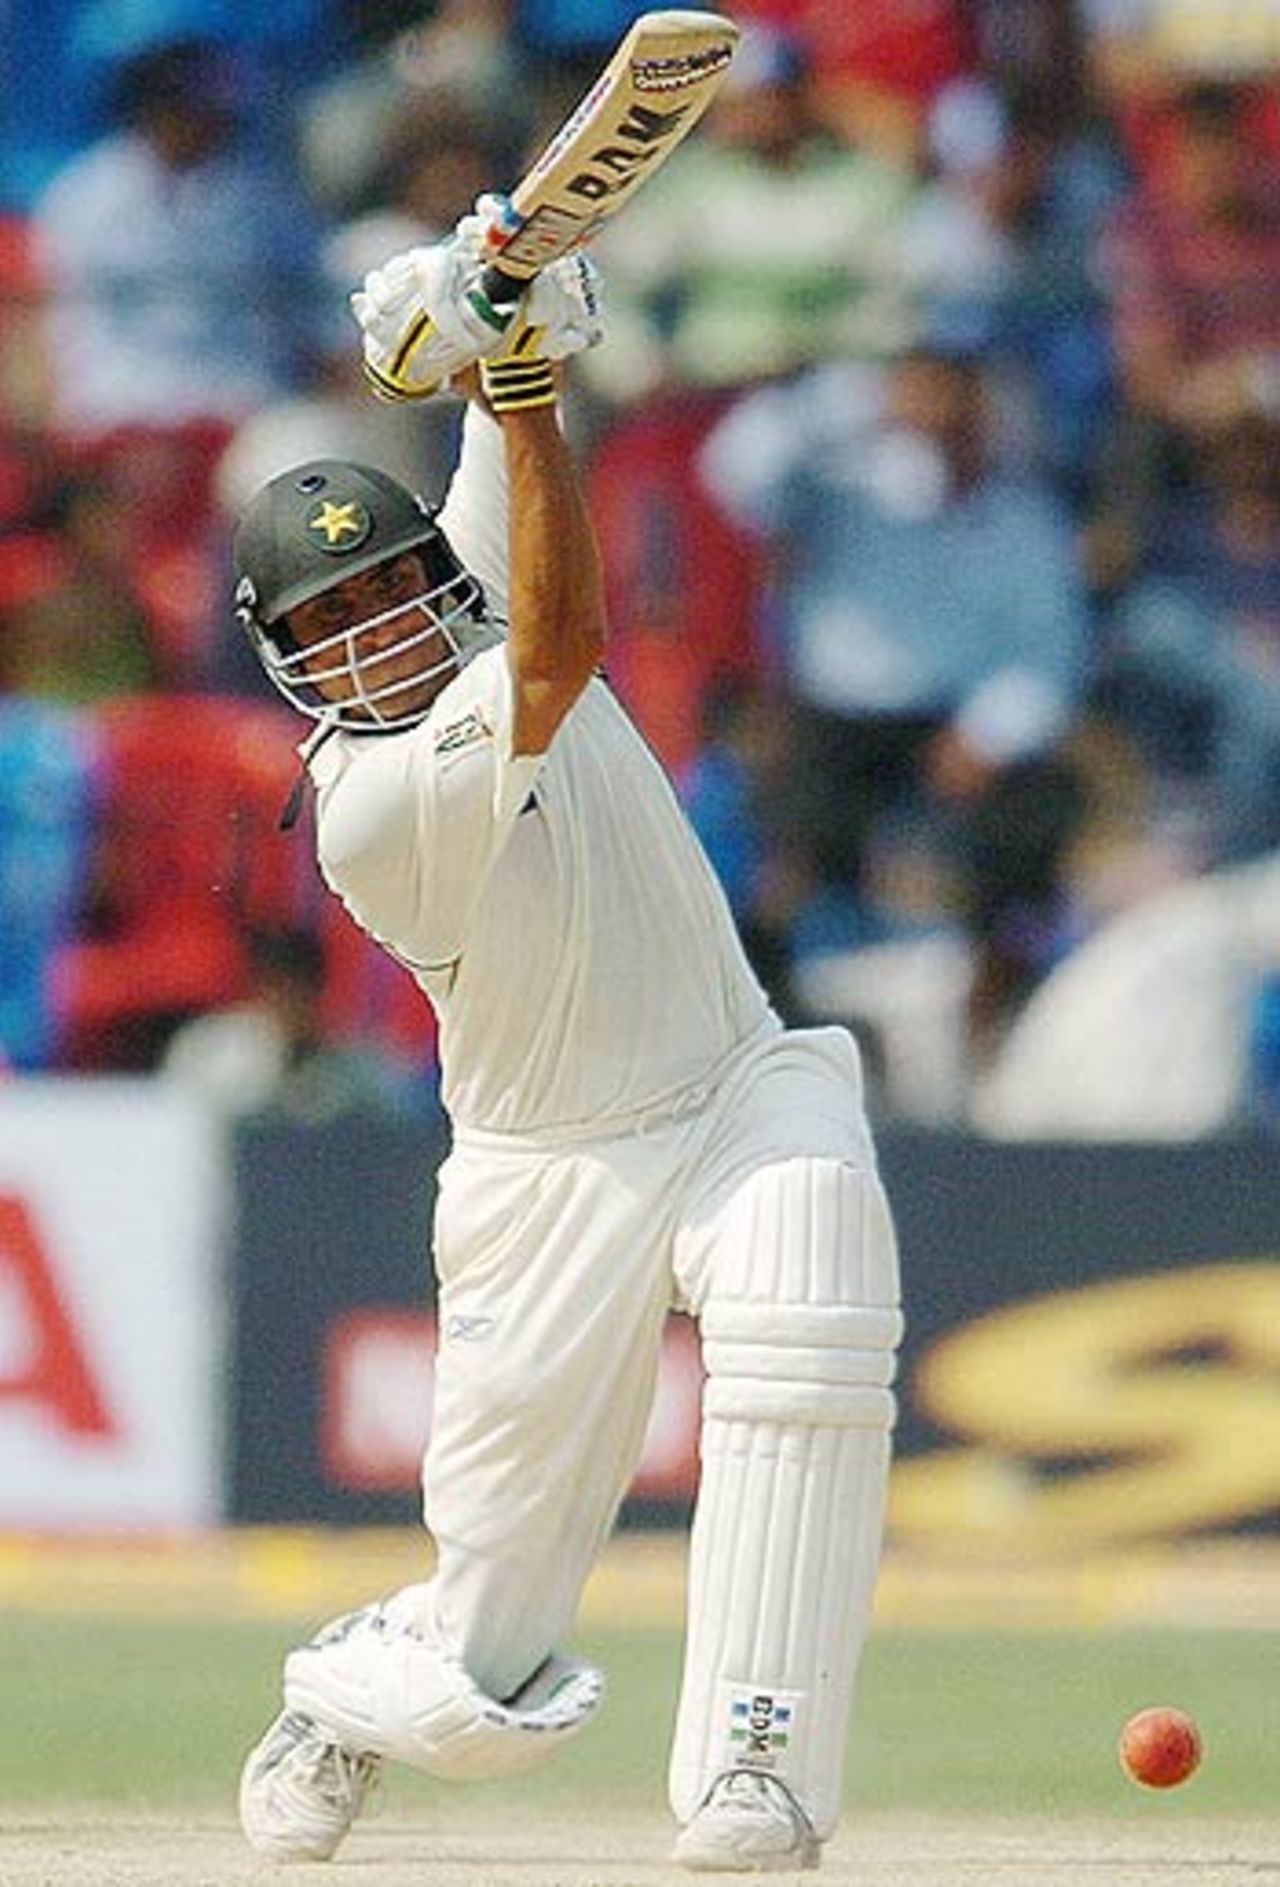 Younis Khan continued from where he had left off in the first innings, beltimg 84 off 96 balls, India v Pakistan, 3rd Test, Bangalore, 4th day, March 27, 2005